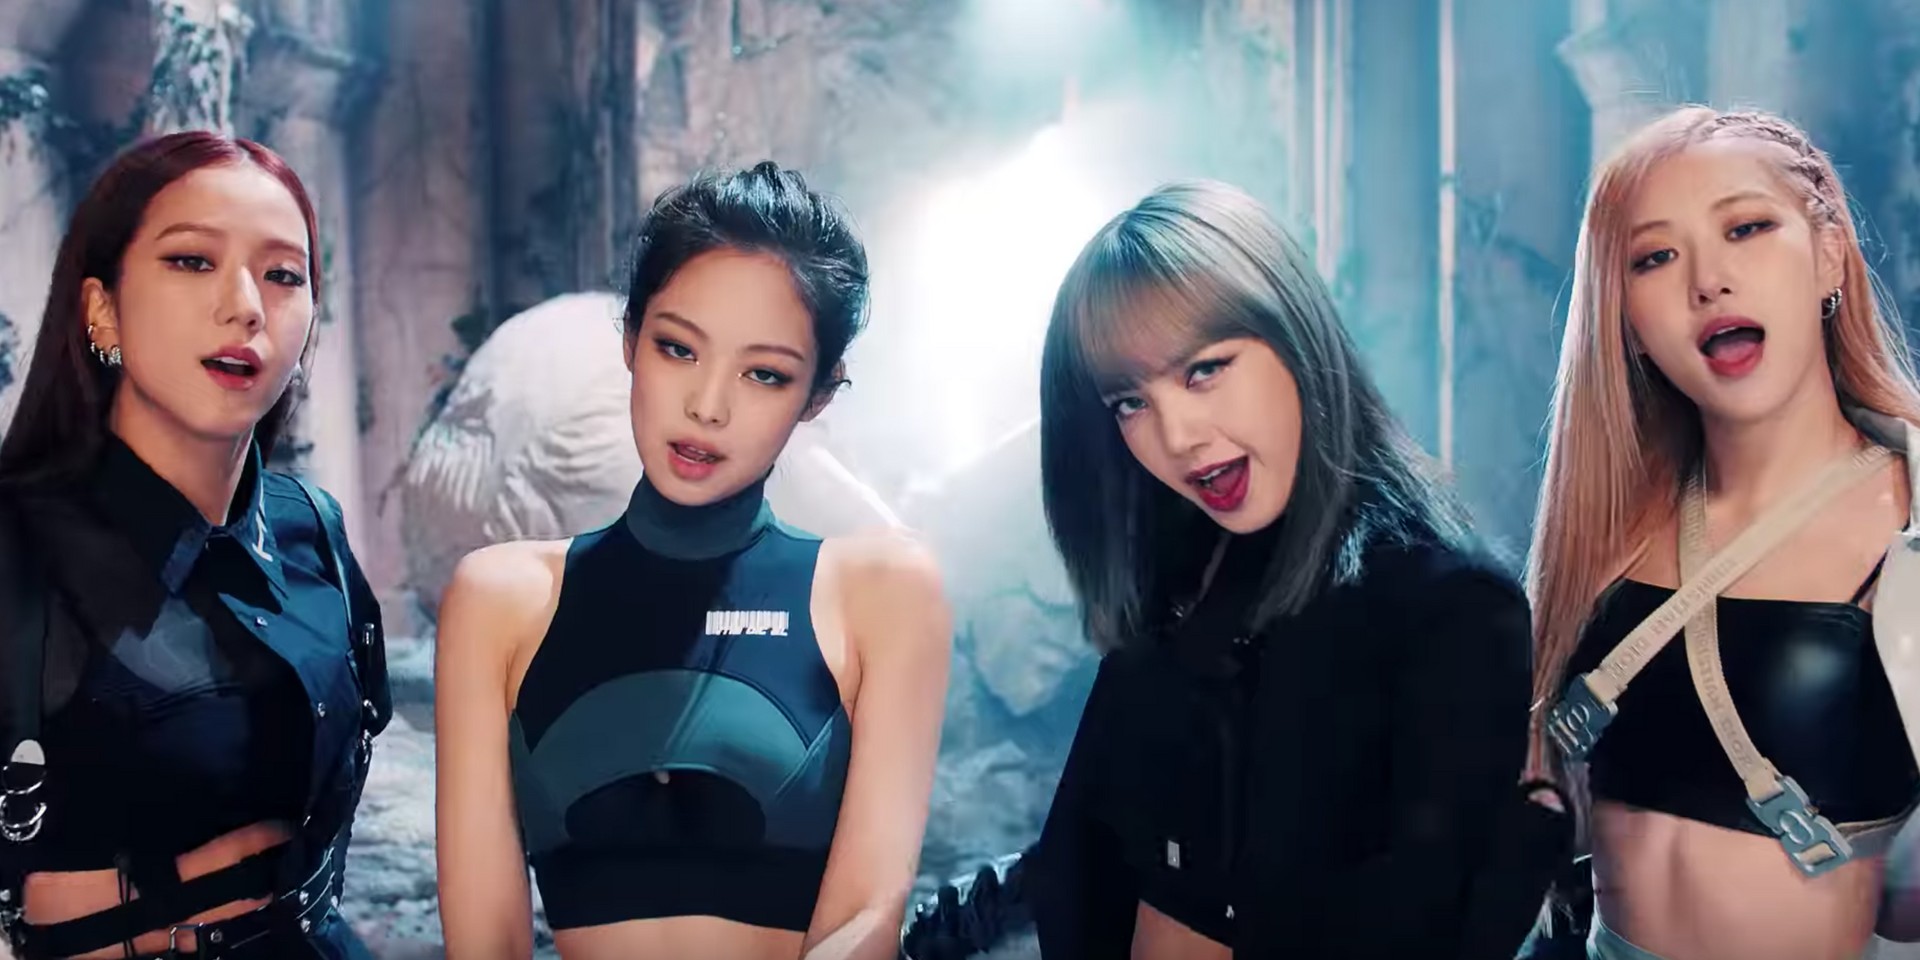 BLACKPINK release powerful music video for fierce new anthem, 'Kill This Love' – watch